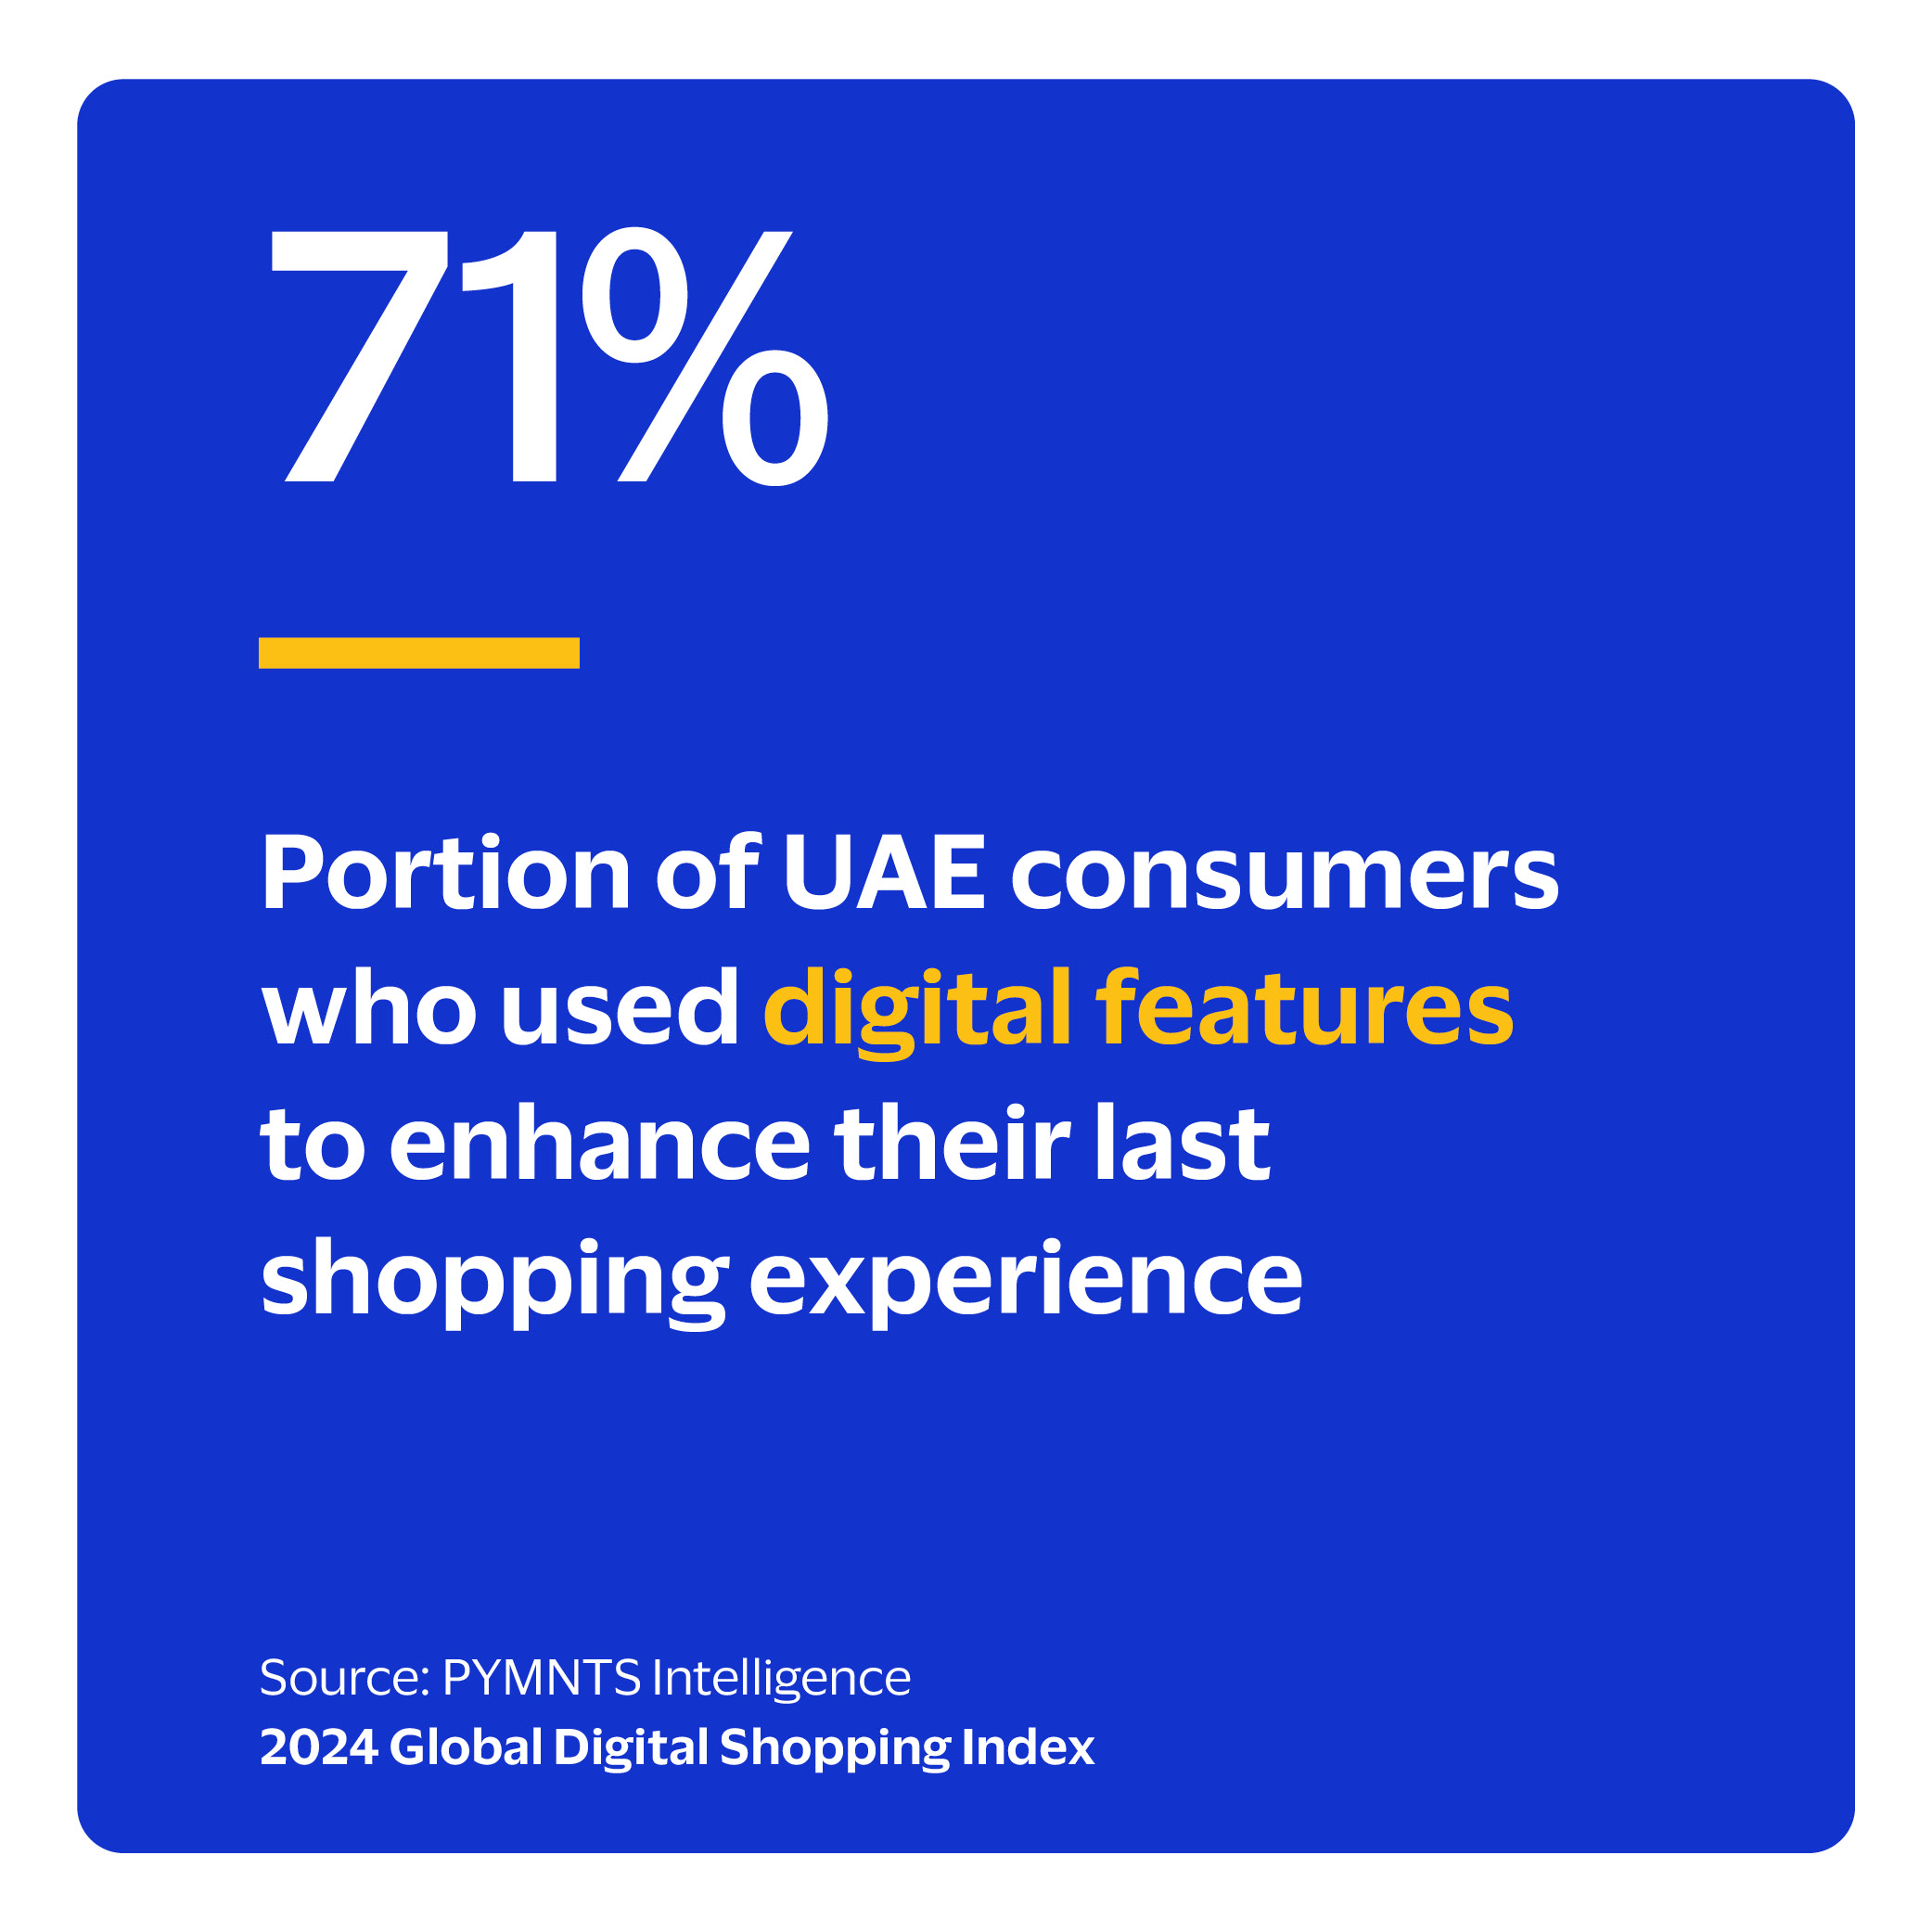 71%: Portion of UAE consumers who used digital features to enhance their last shopping experience